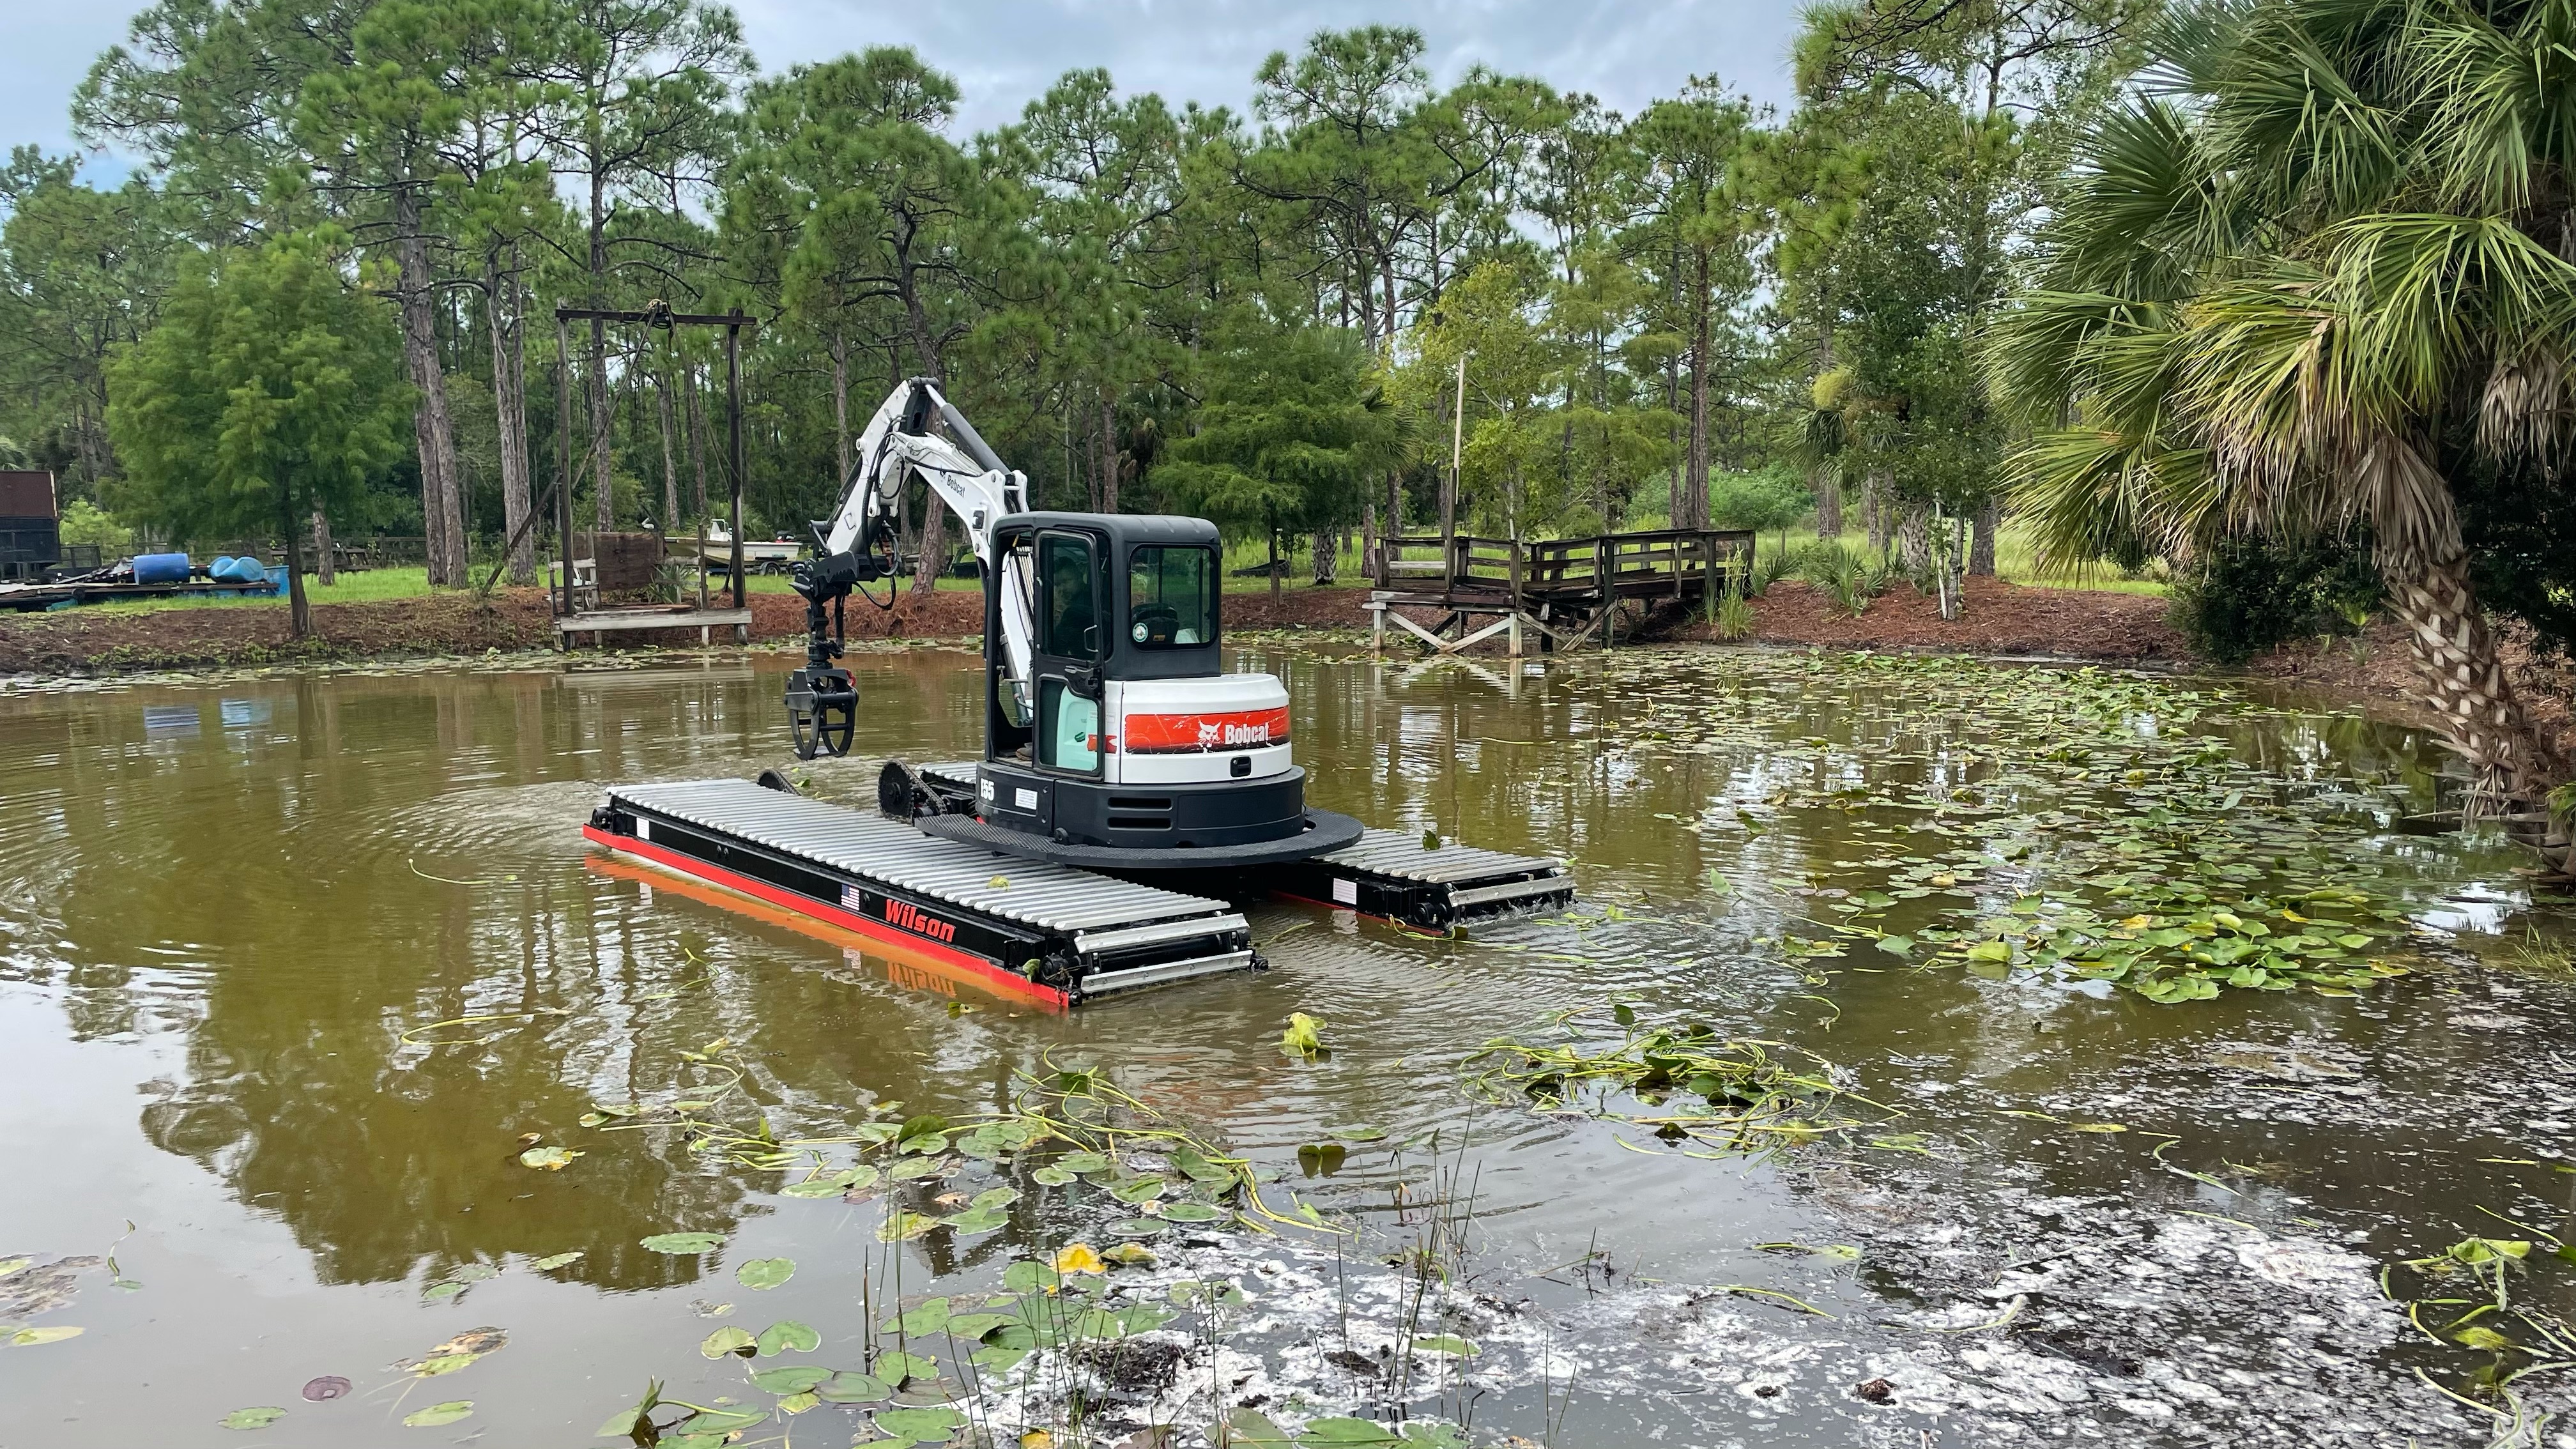 A Bobcat Amphibious Excavator operating in swampy conditions.